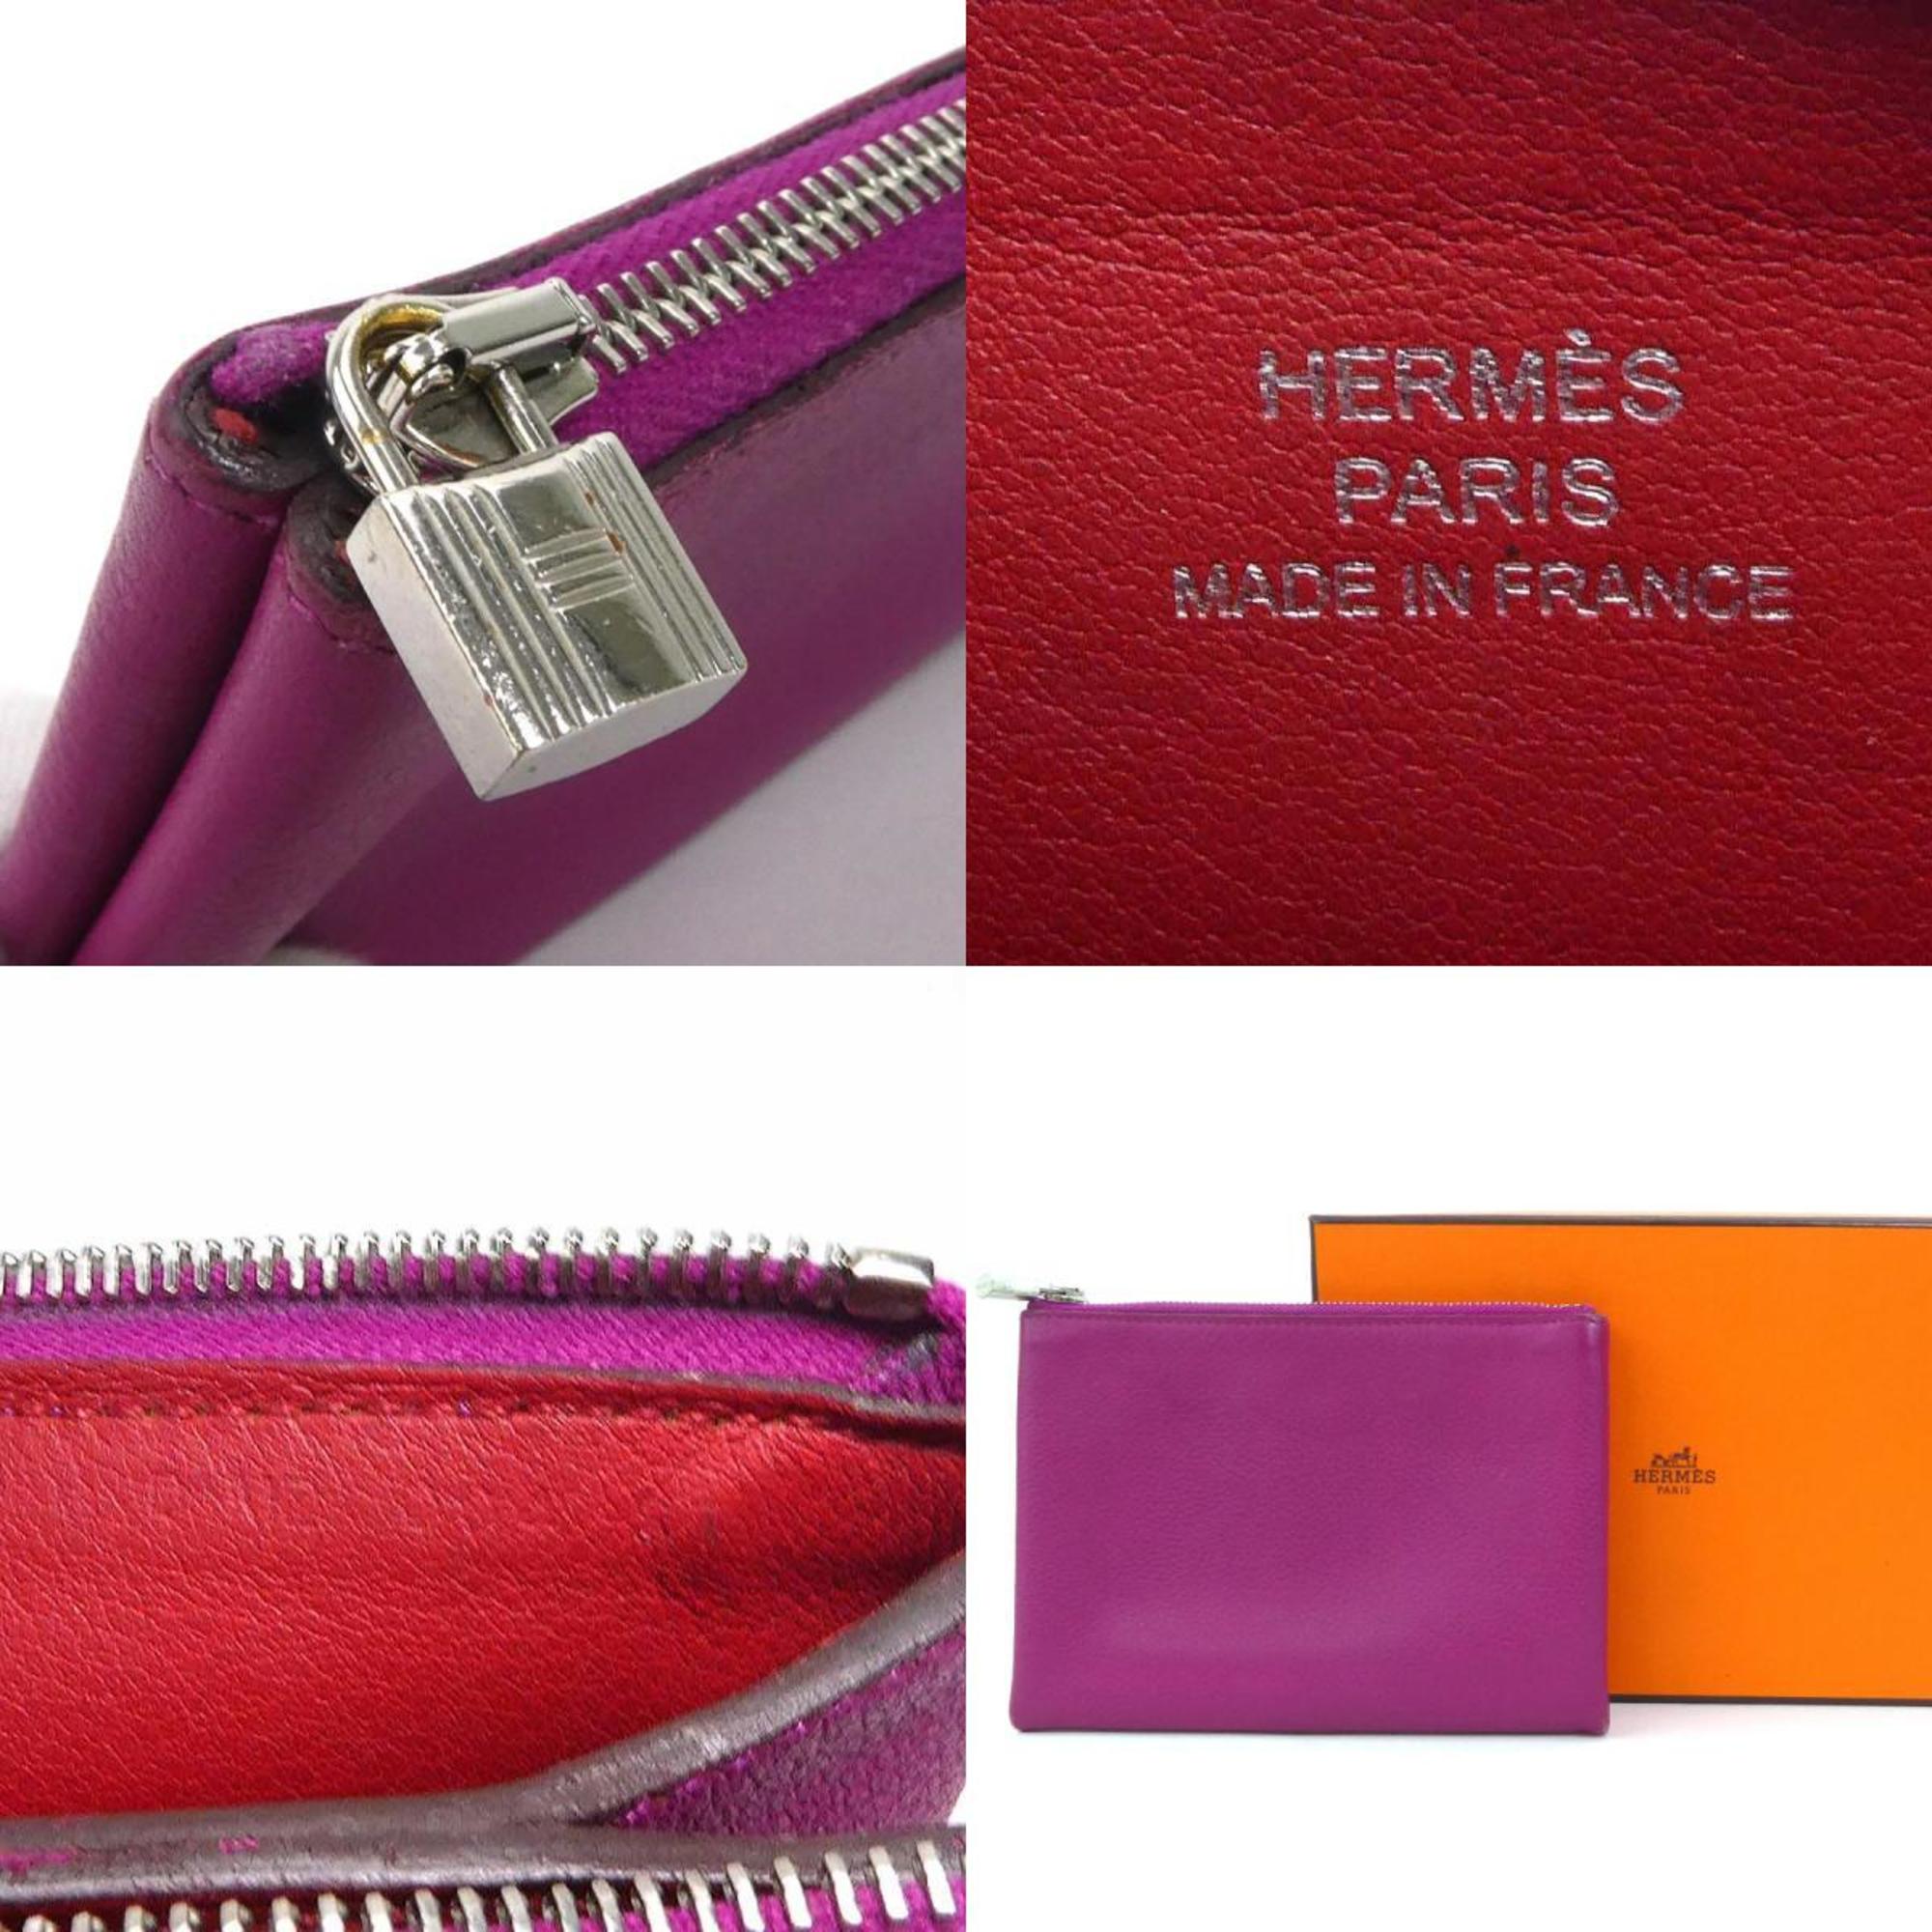 Hermes HERMES coin case card pouch attou 14 PM leather purple silver unisex